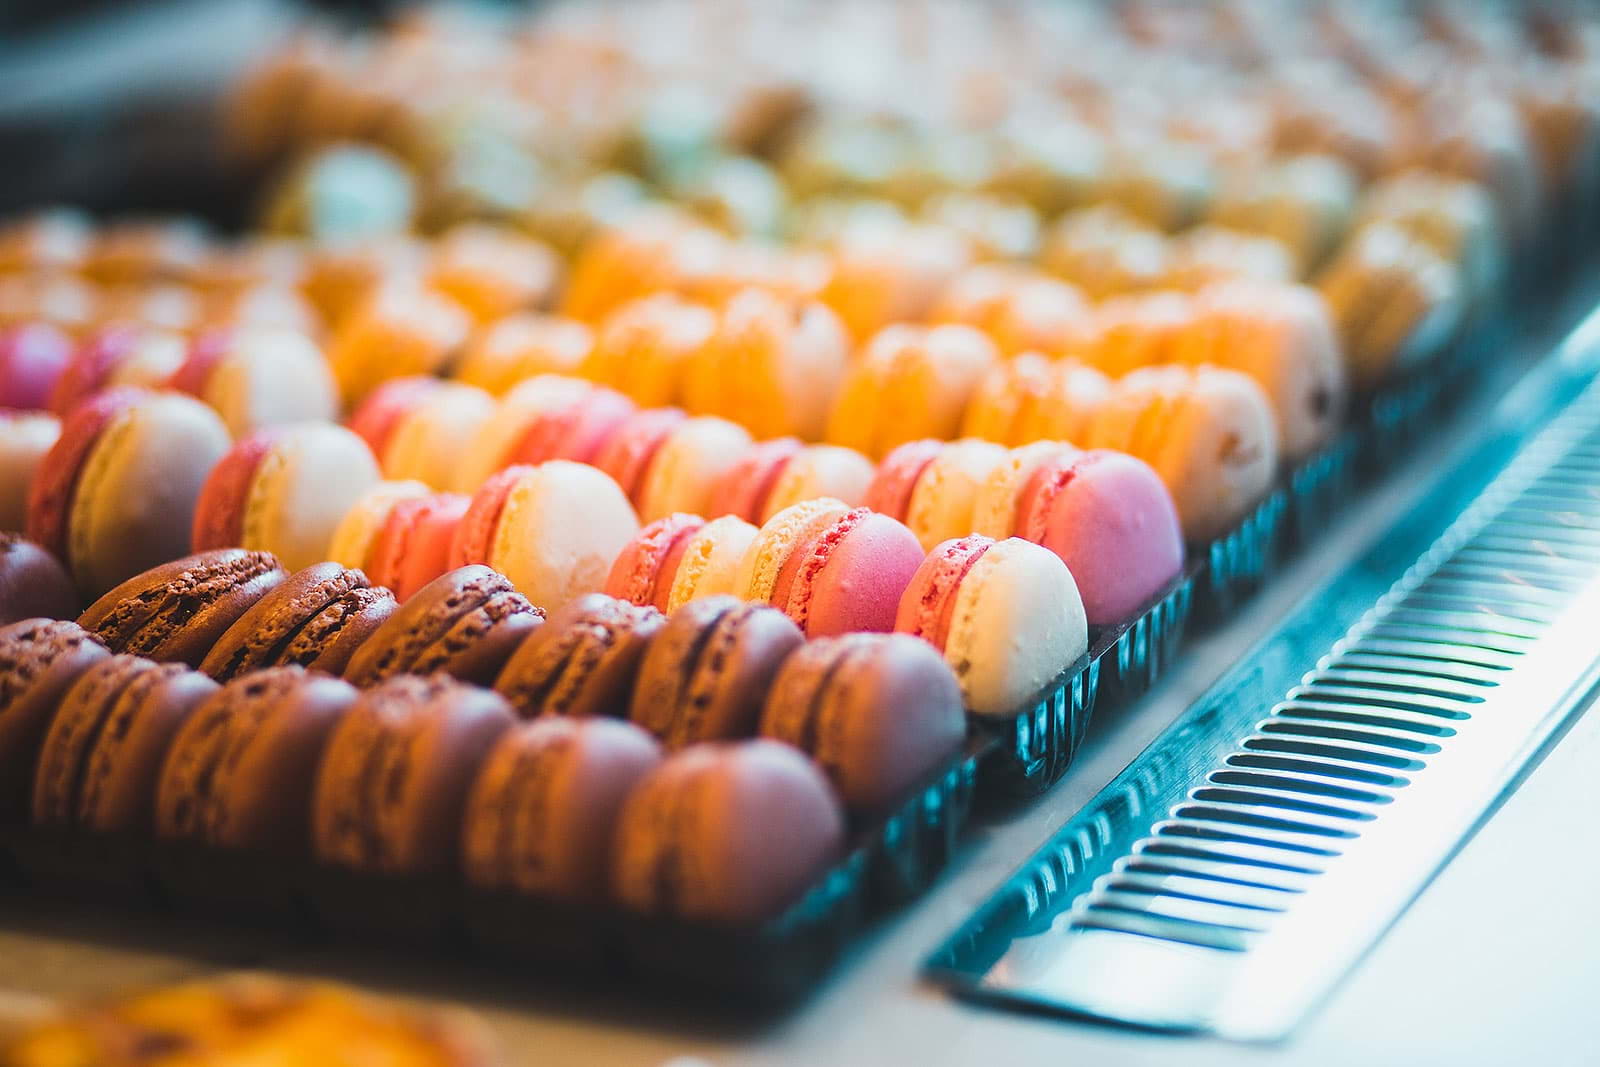 Guide to the best patisseries in London